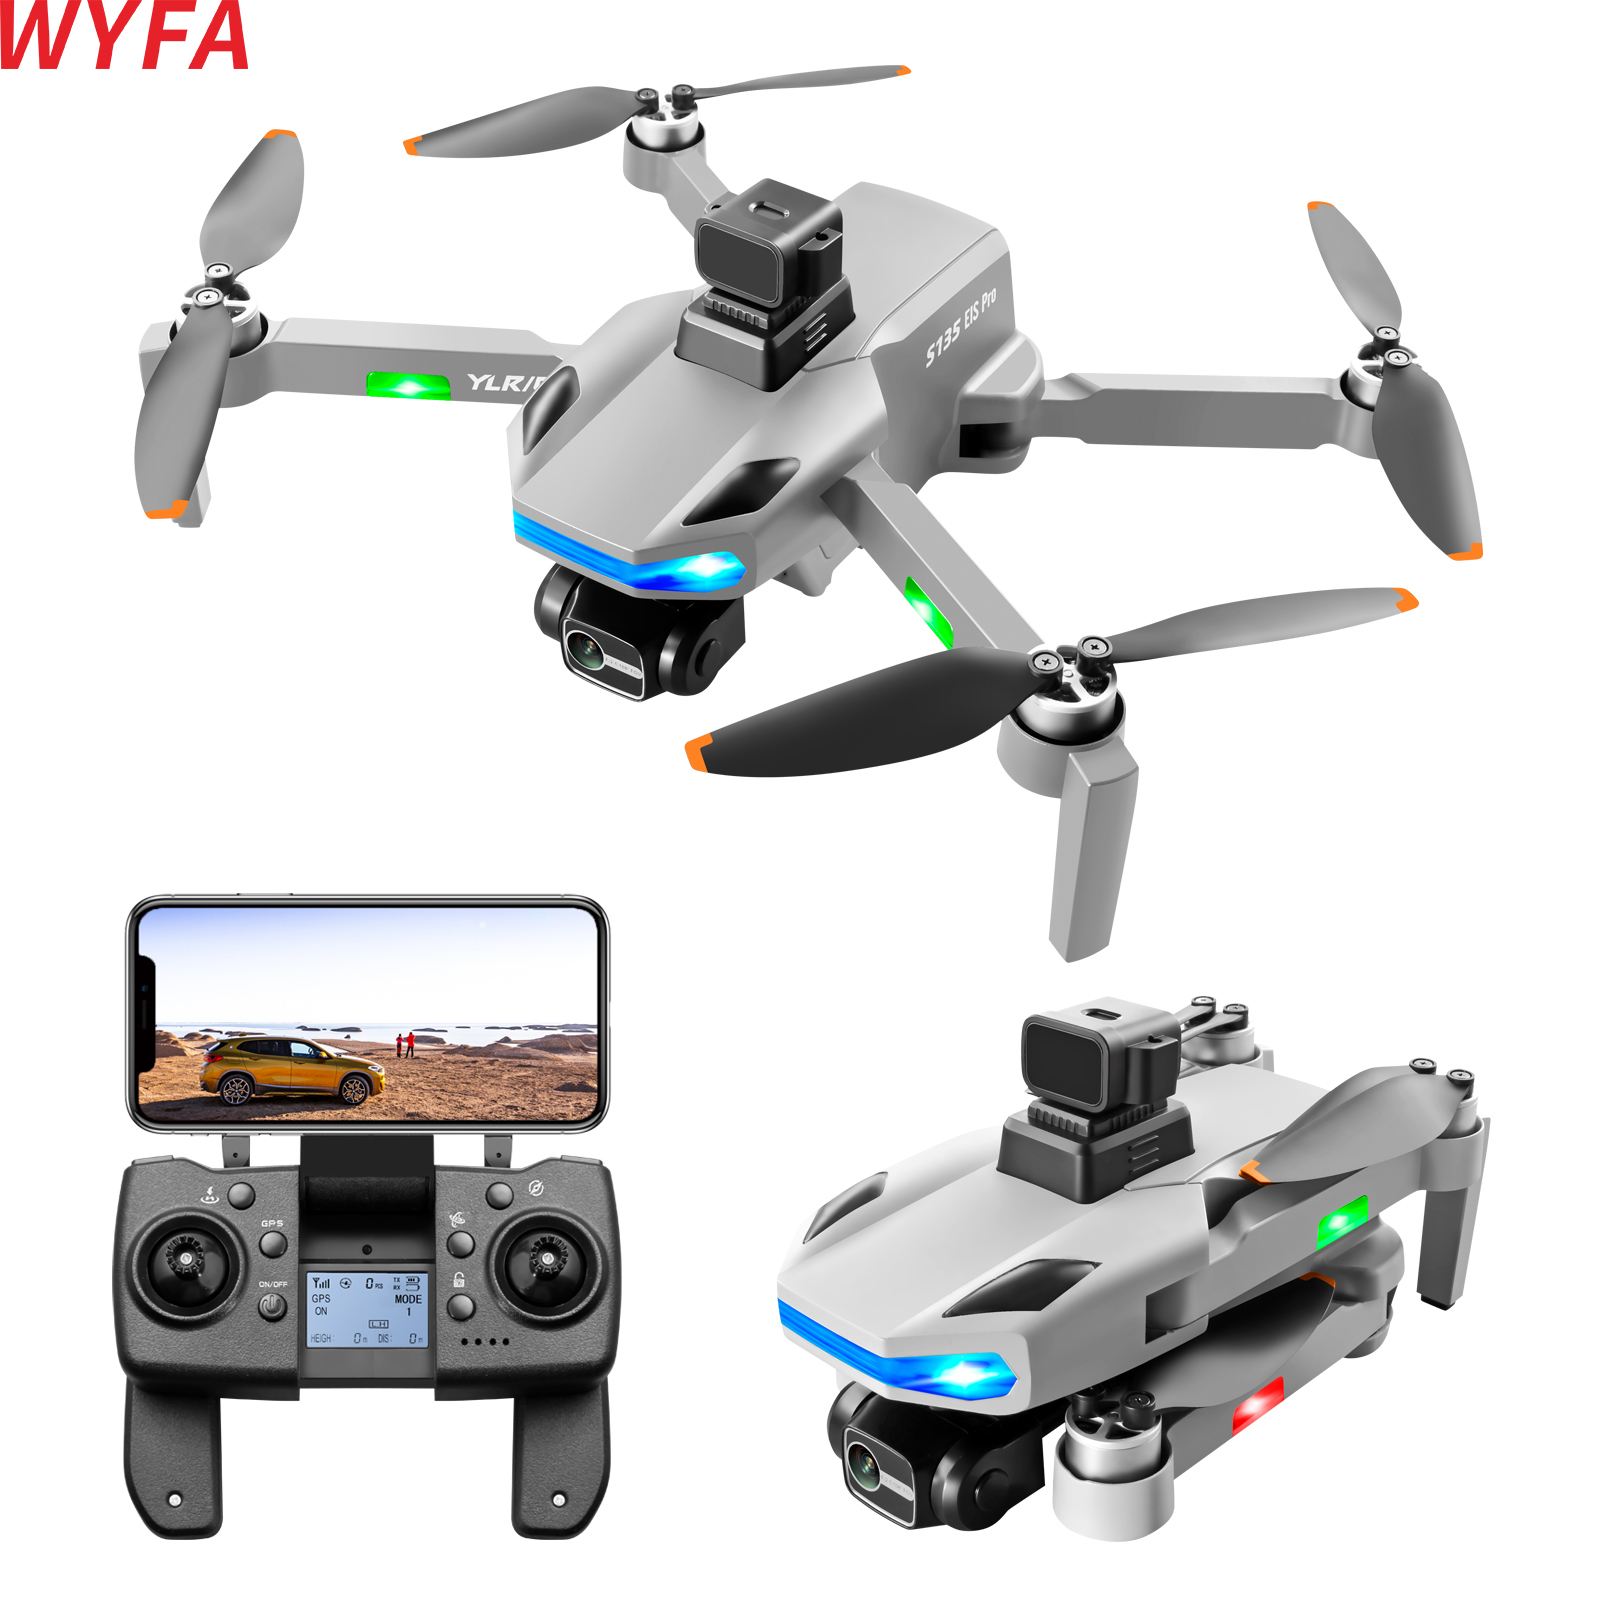 WYFA GPS Drone 8k Profesional HD Camera 3-Axis Gimbal Anti-Shake Photography Brushless Foldable obstacle avoidance Quadcopter